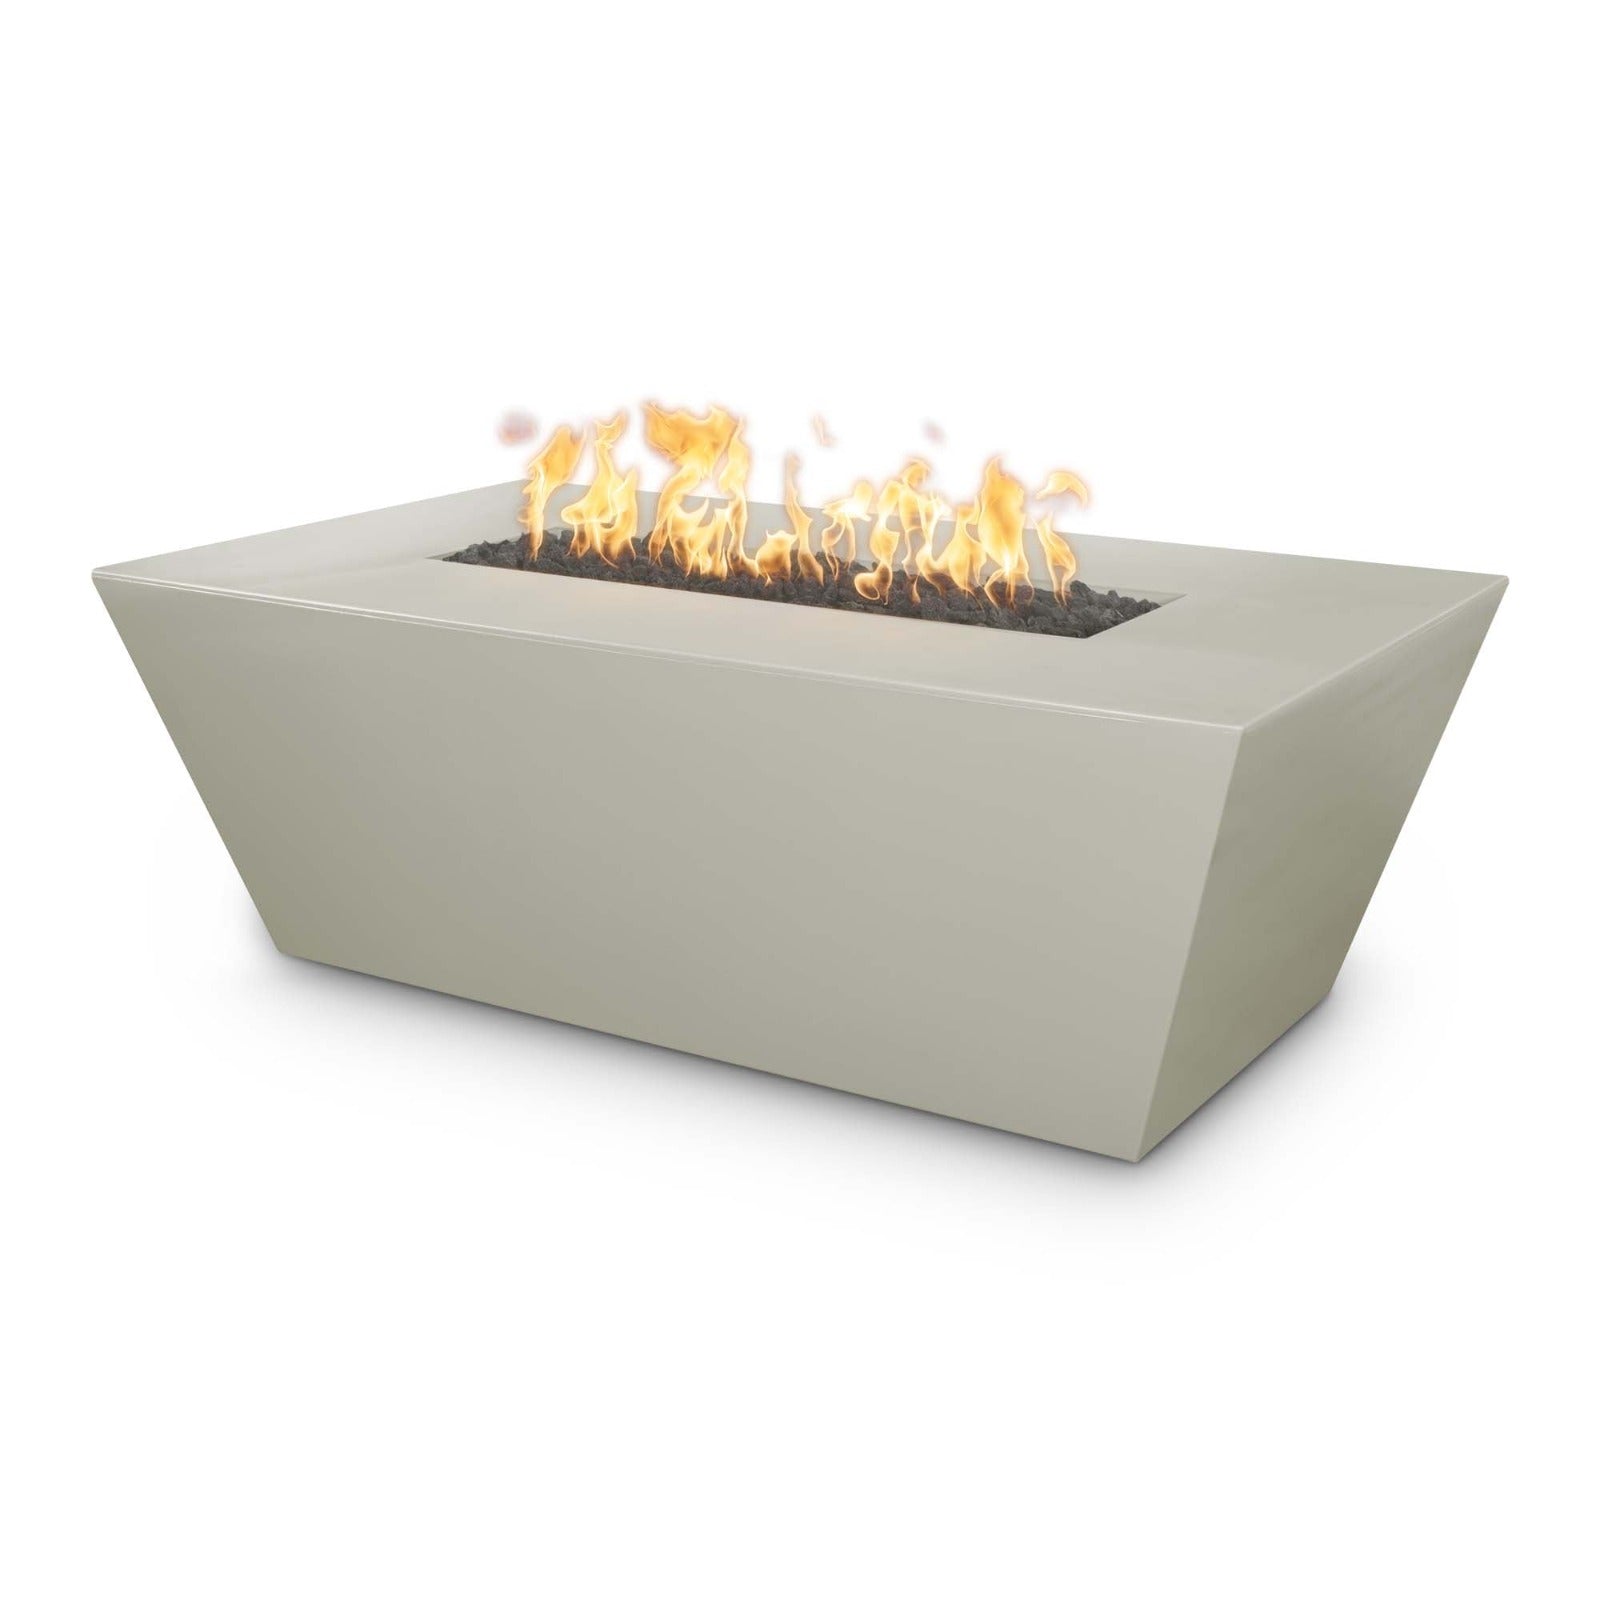 The Outdoor Plus Fire Features Ash (-ASH) / Match Lit Ignition / Liquid Propane The Outdoor Plus 60" Rectangular Angelus Fire Pit in Solid Concrete Finishes - GFRC Concrete / OPT-AGLGF60, OPT-AGLGF60FSML, OPT-AGLGF60FSEN, OPT-AGLGF60E12V, OPT-AGLGF60EKIT